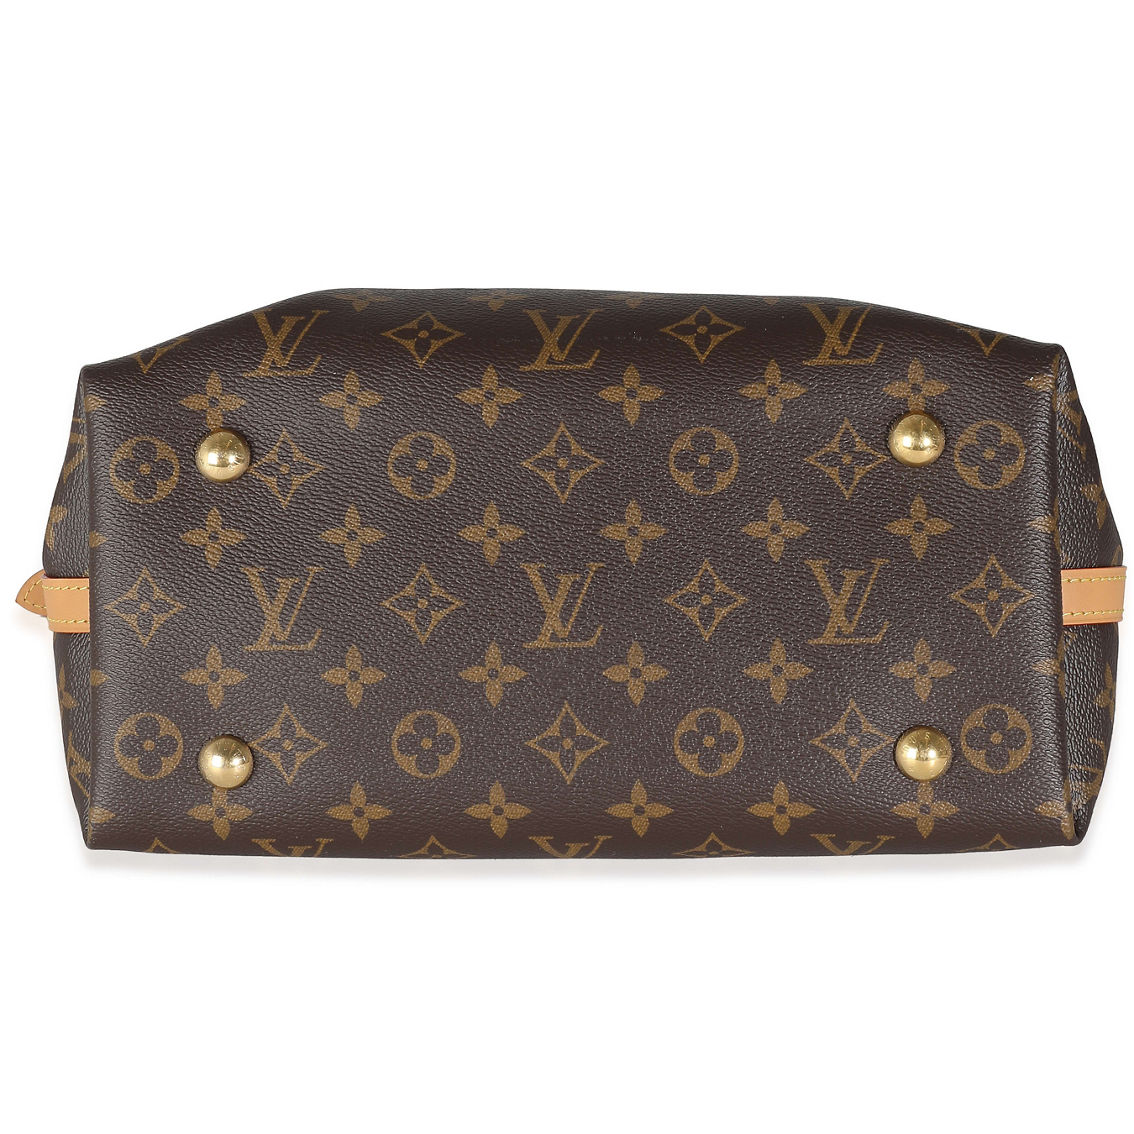 Louis Vuitton CarryAll PM Pre-Owned - Image 4 of 5